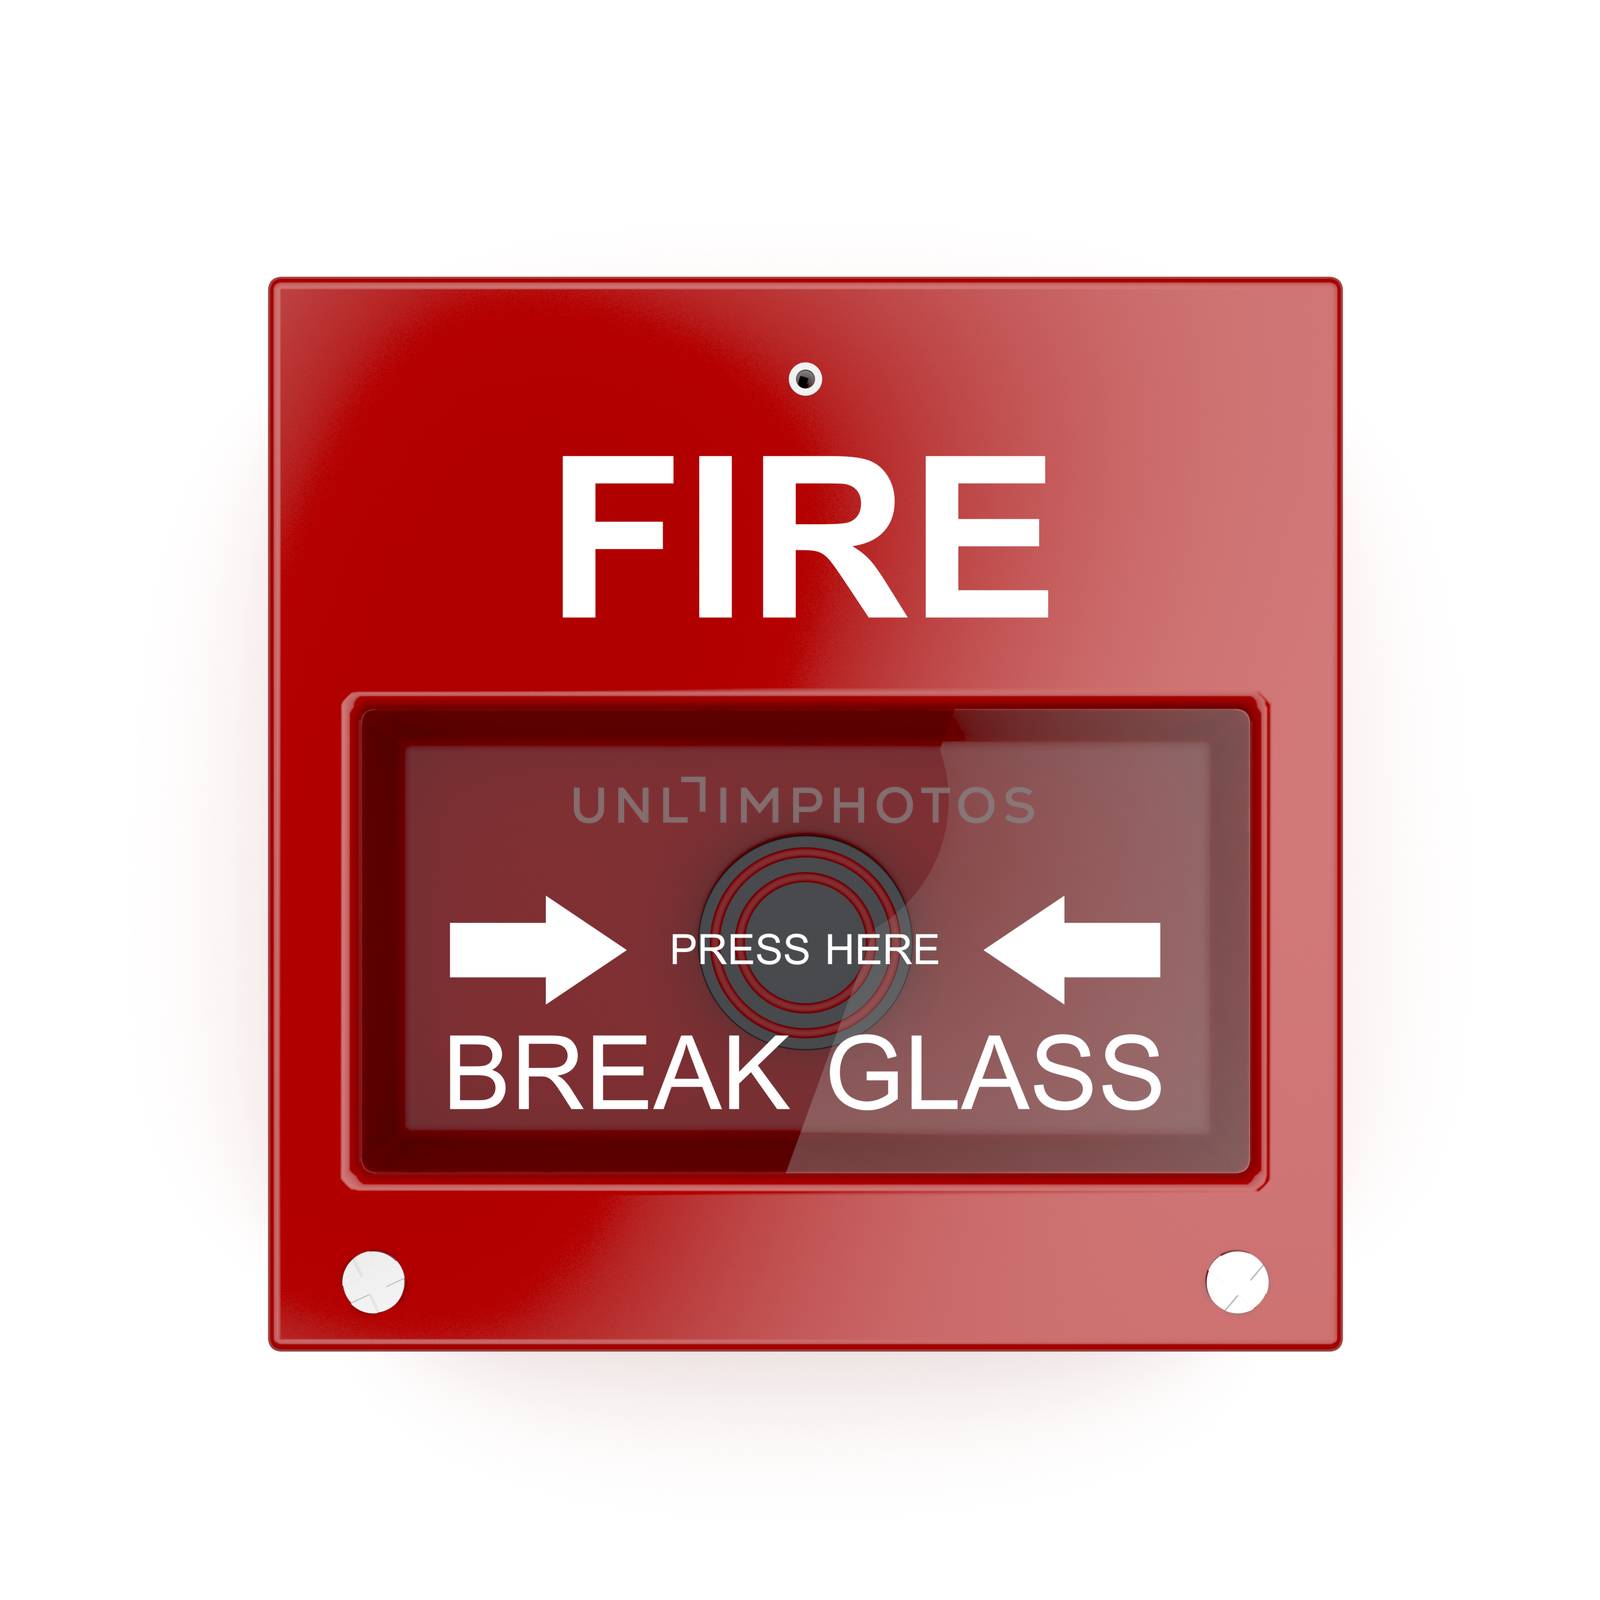 Fire alarm by magraphics